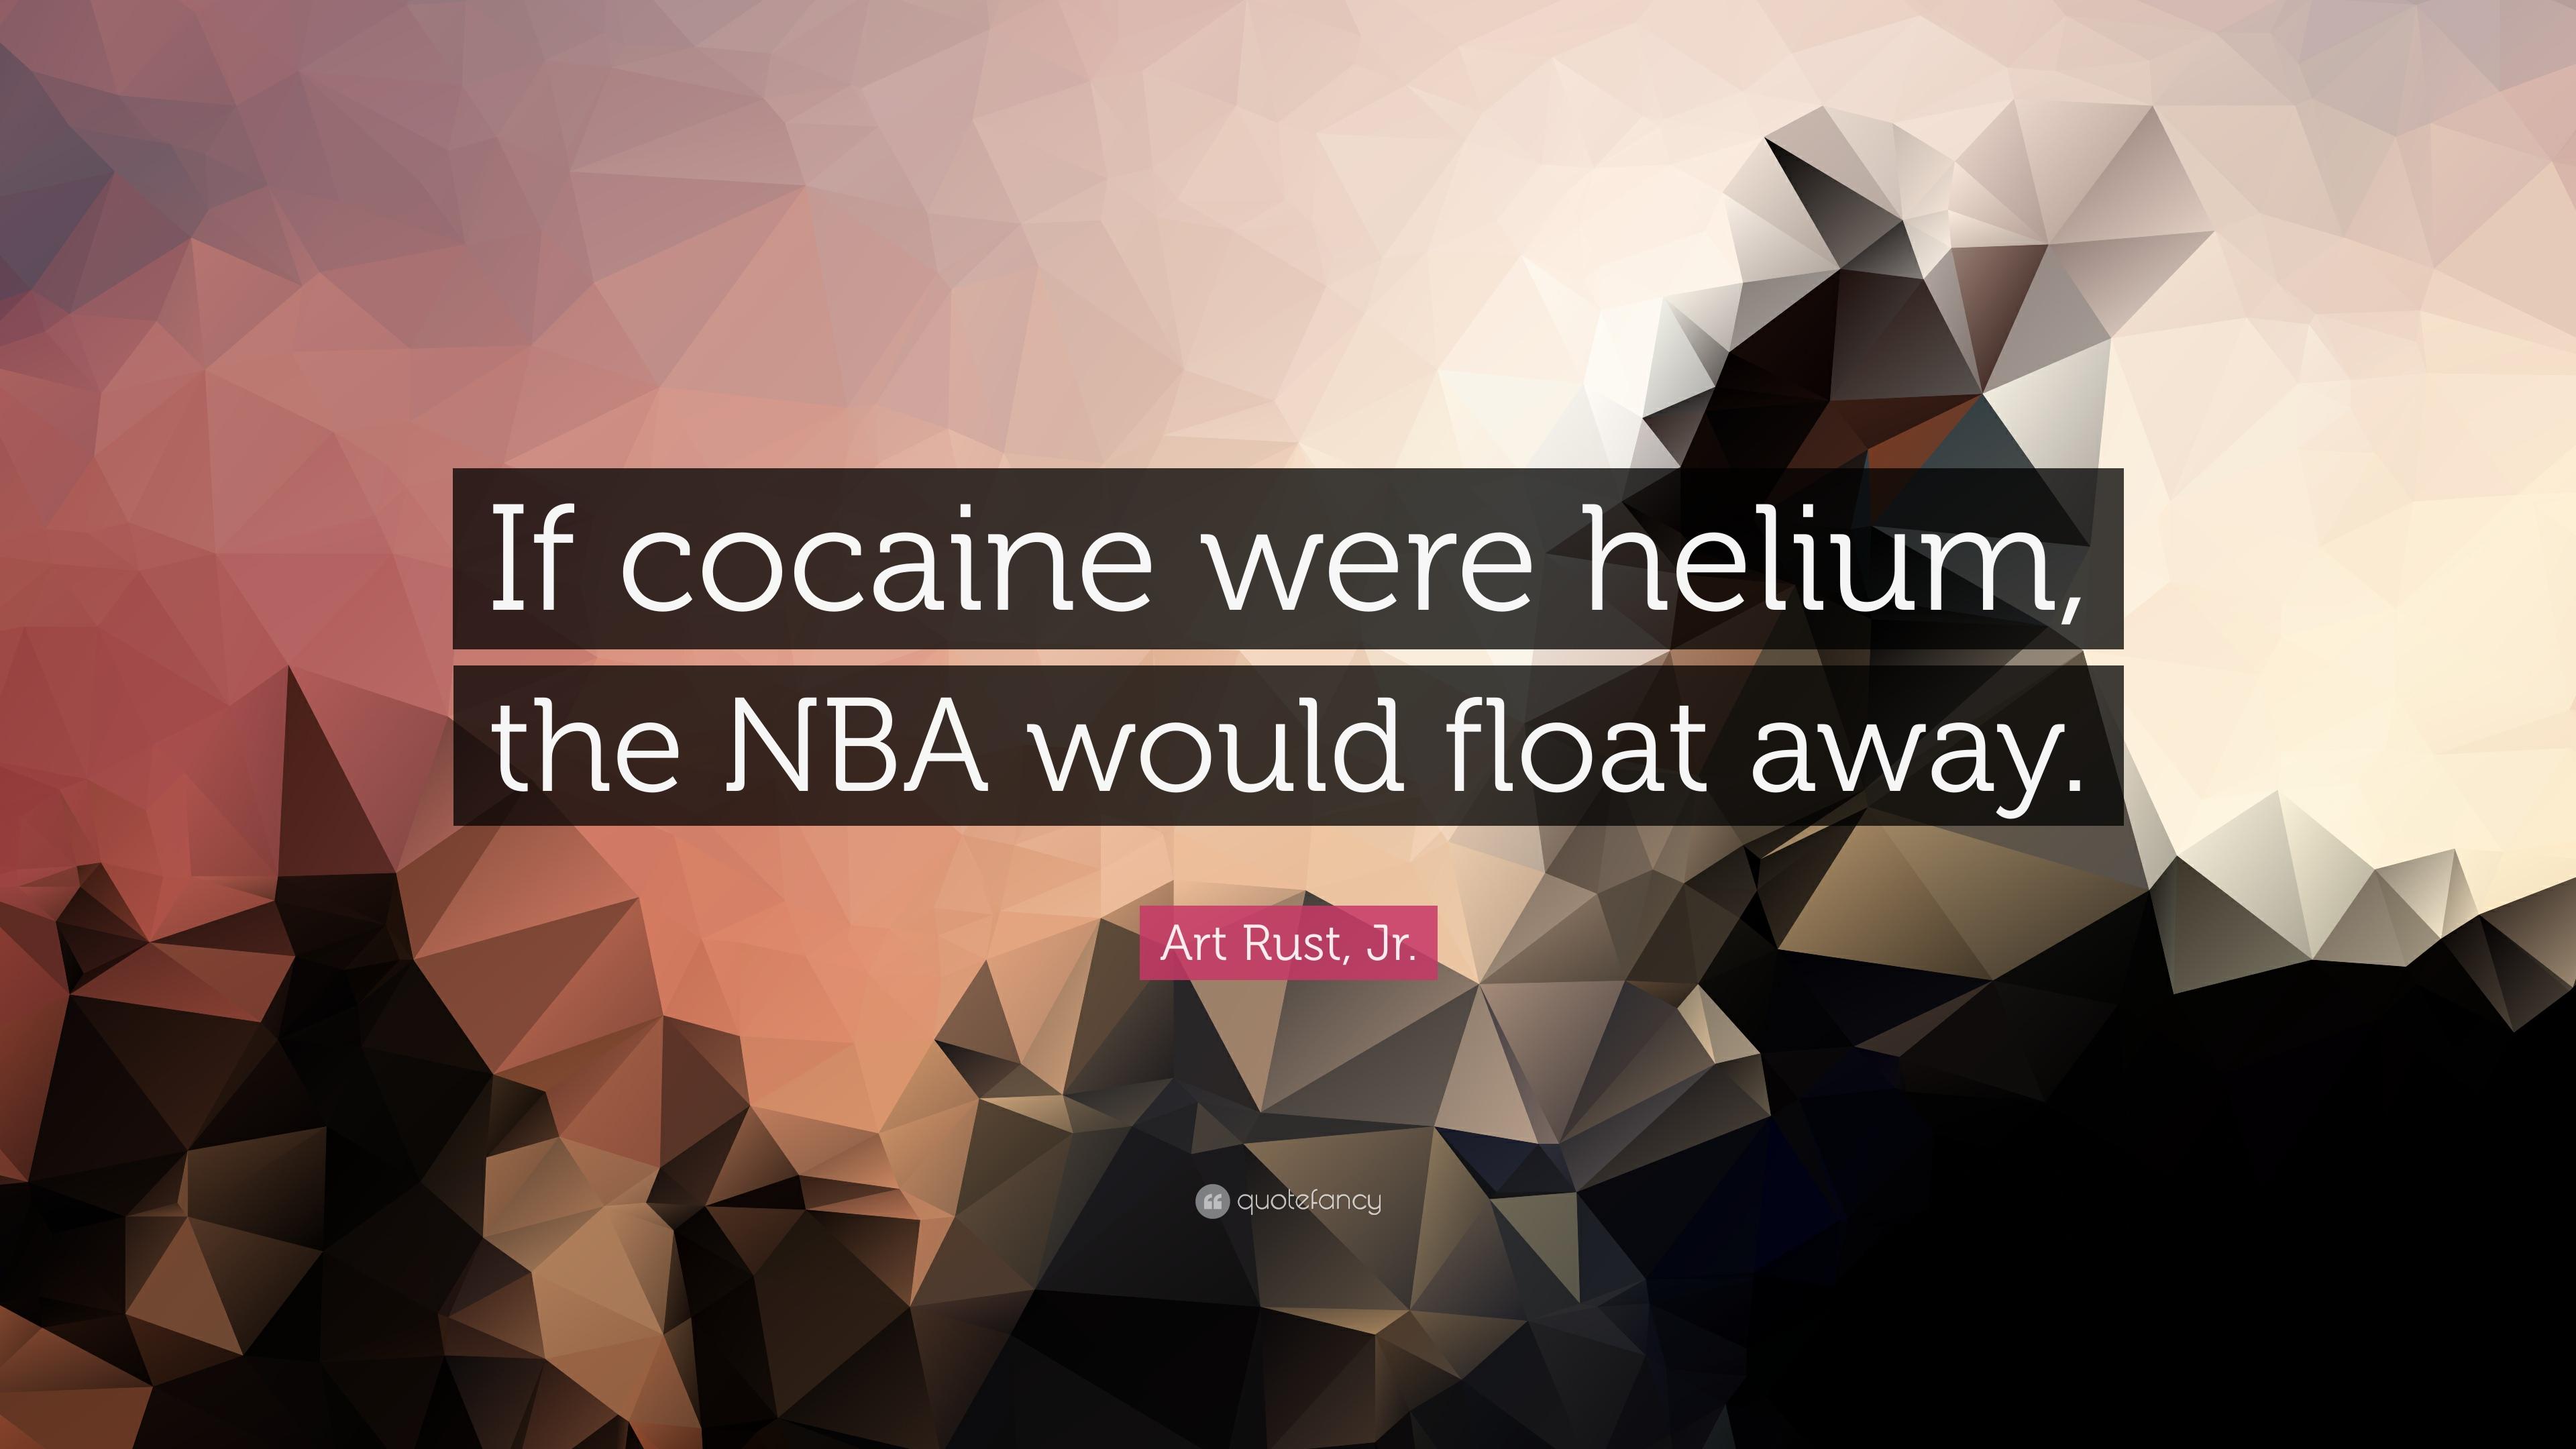 Art Rust, Jr. Quote: “If cocaine were helium, the NBA would float